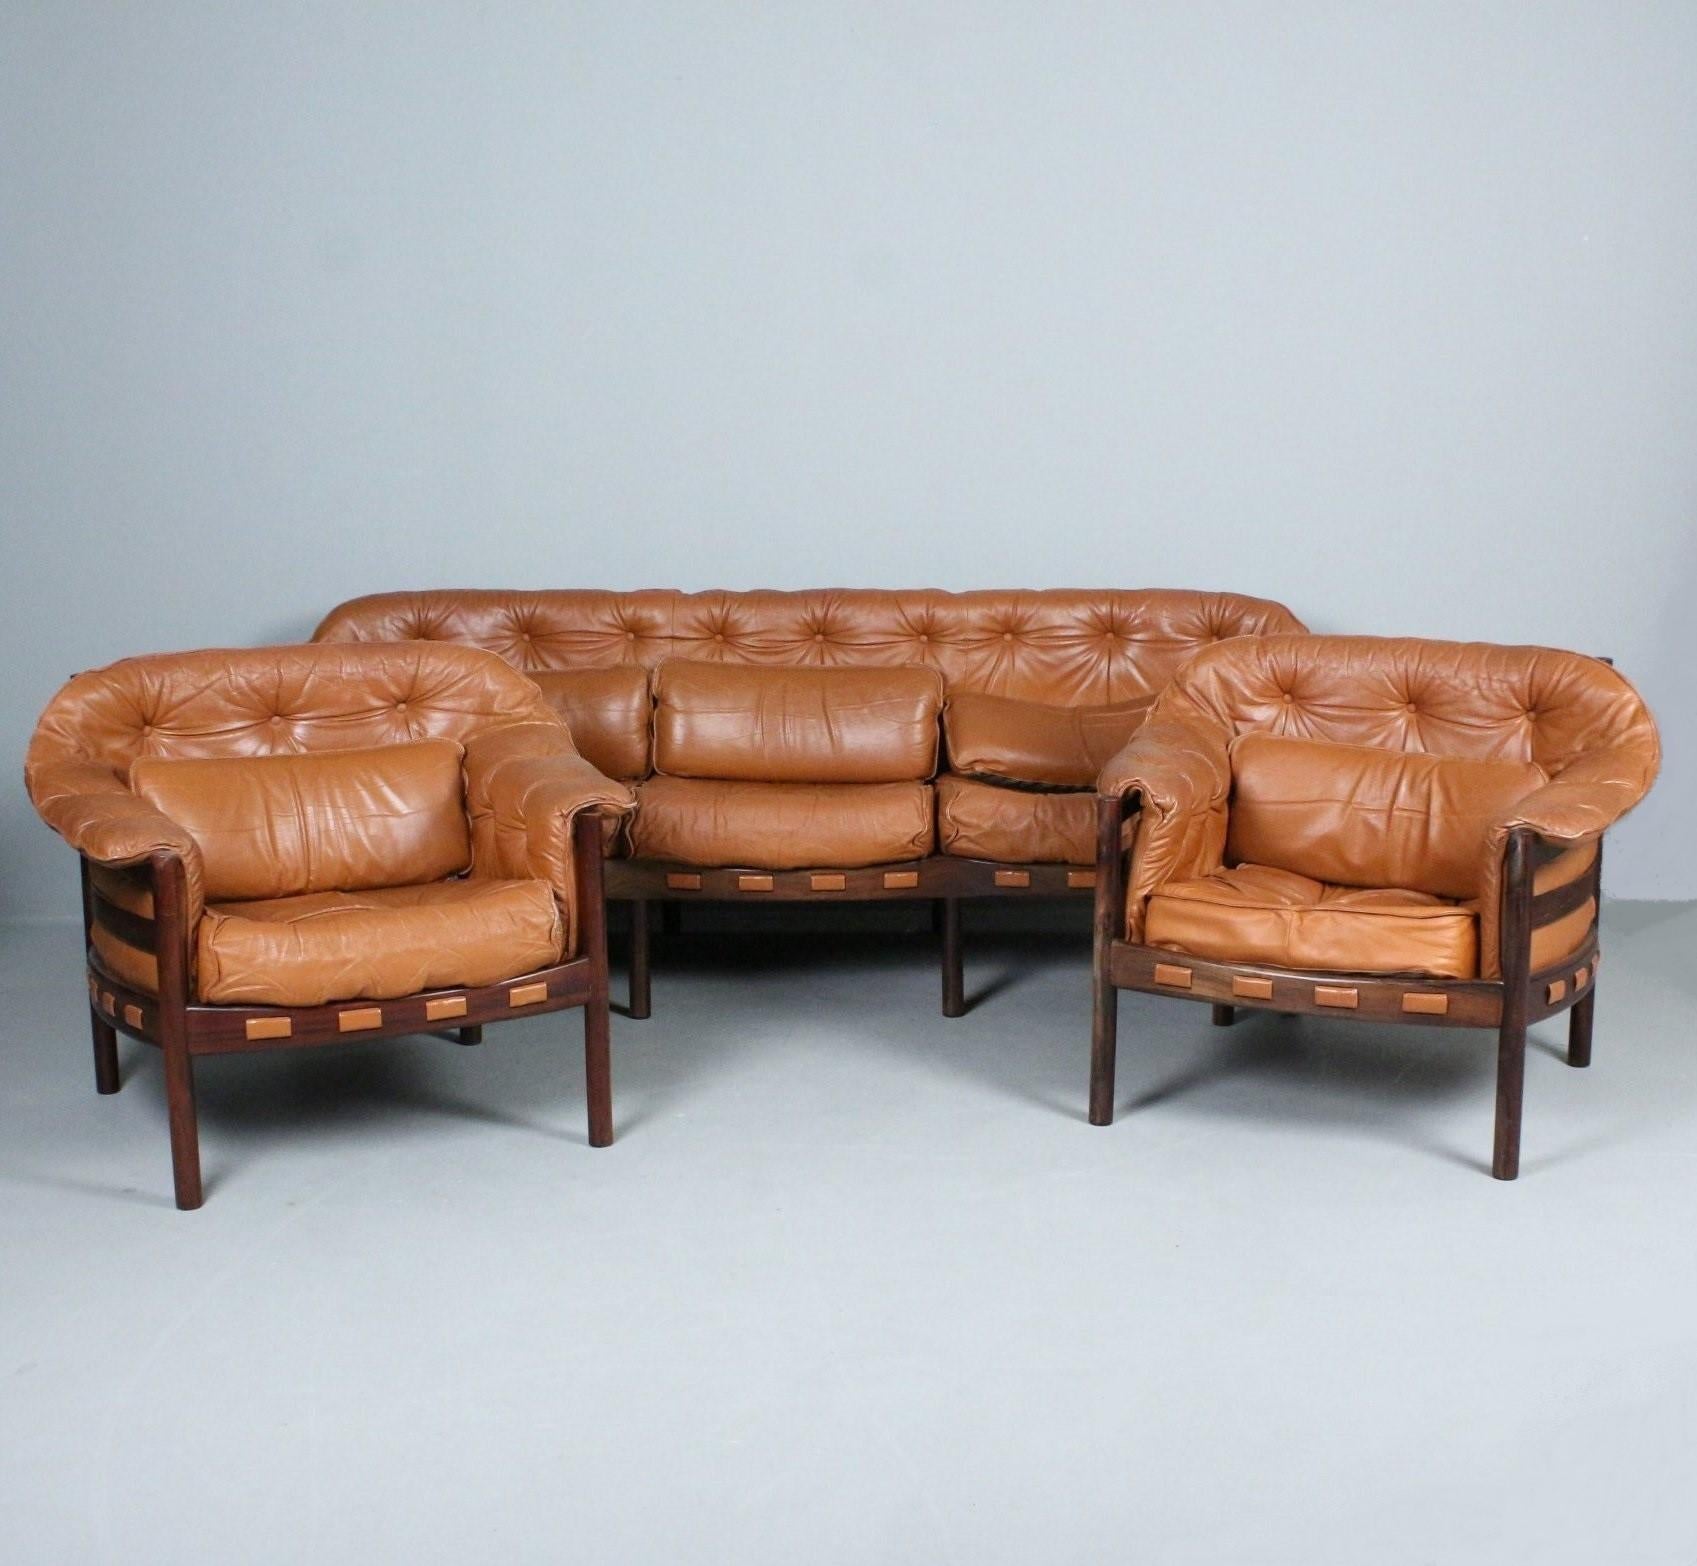 Arne Norell Sofa Brown leather for Coja Sweden 1960 For Sale 3